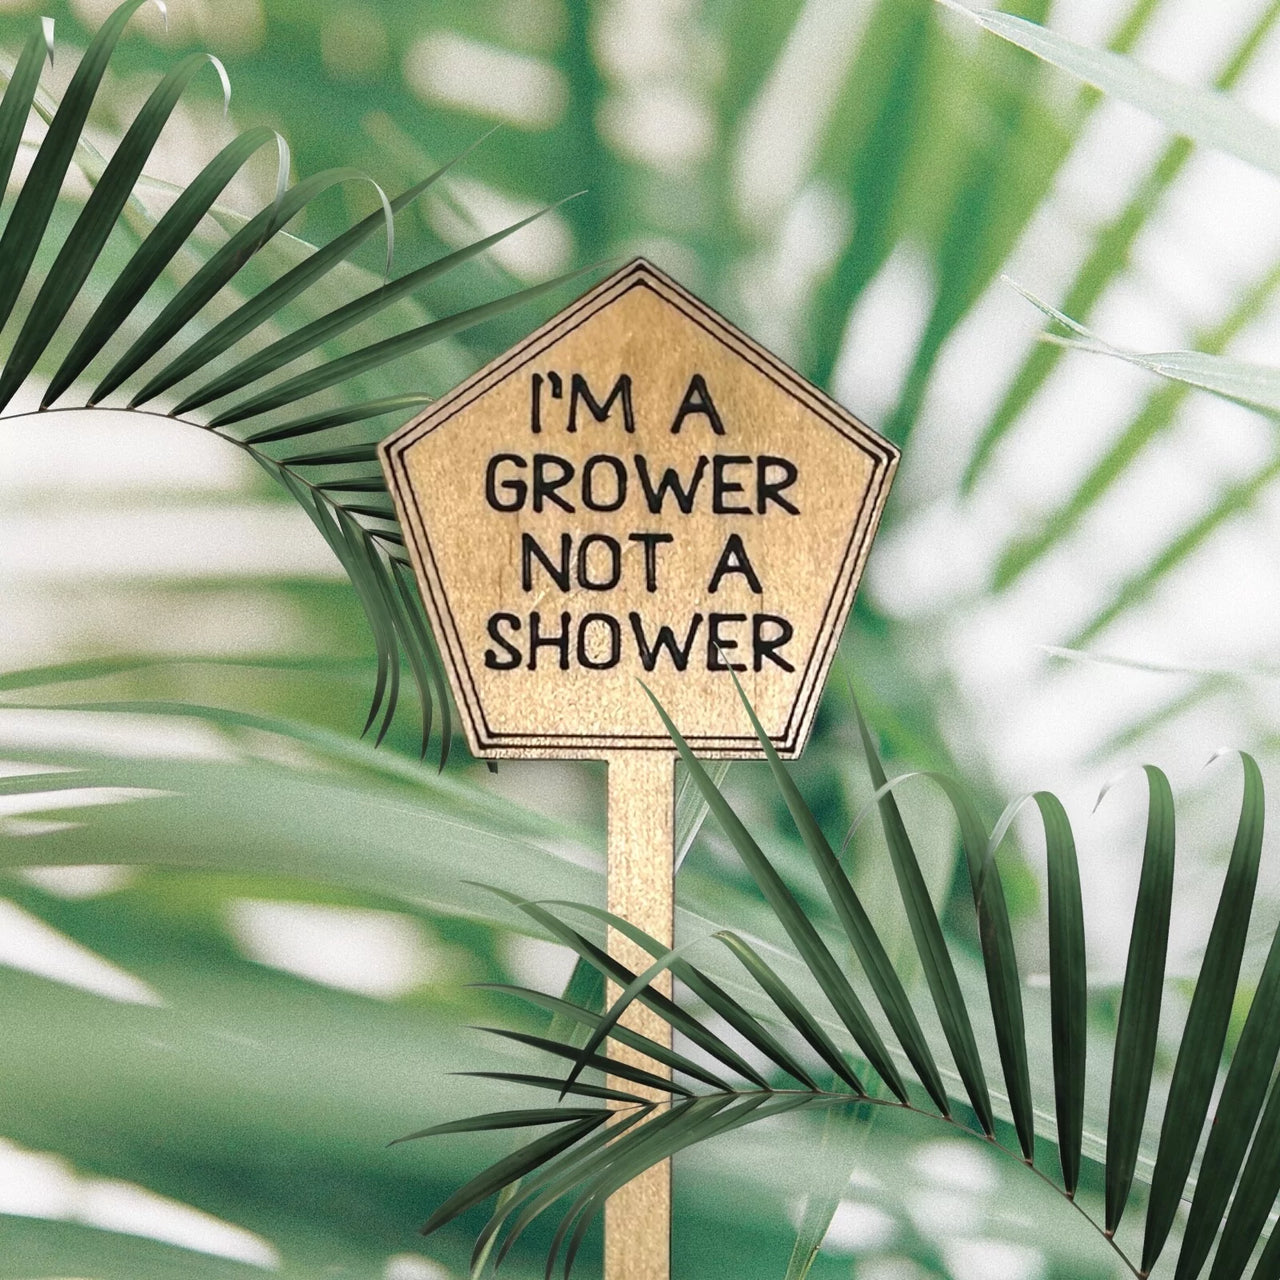 Funny Plant Stakes - Made from Sustainable Timber - IM A GROWER NOT A SHOWER